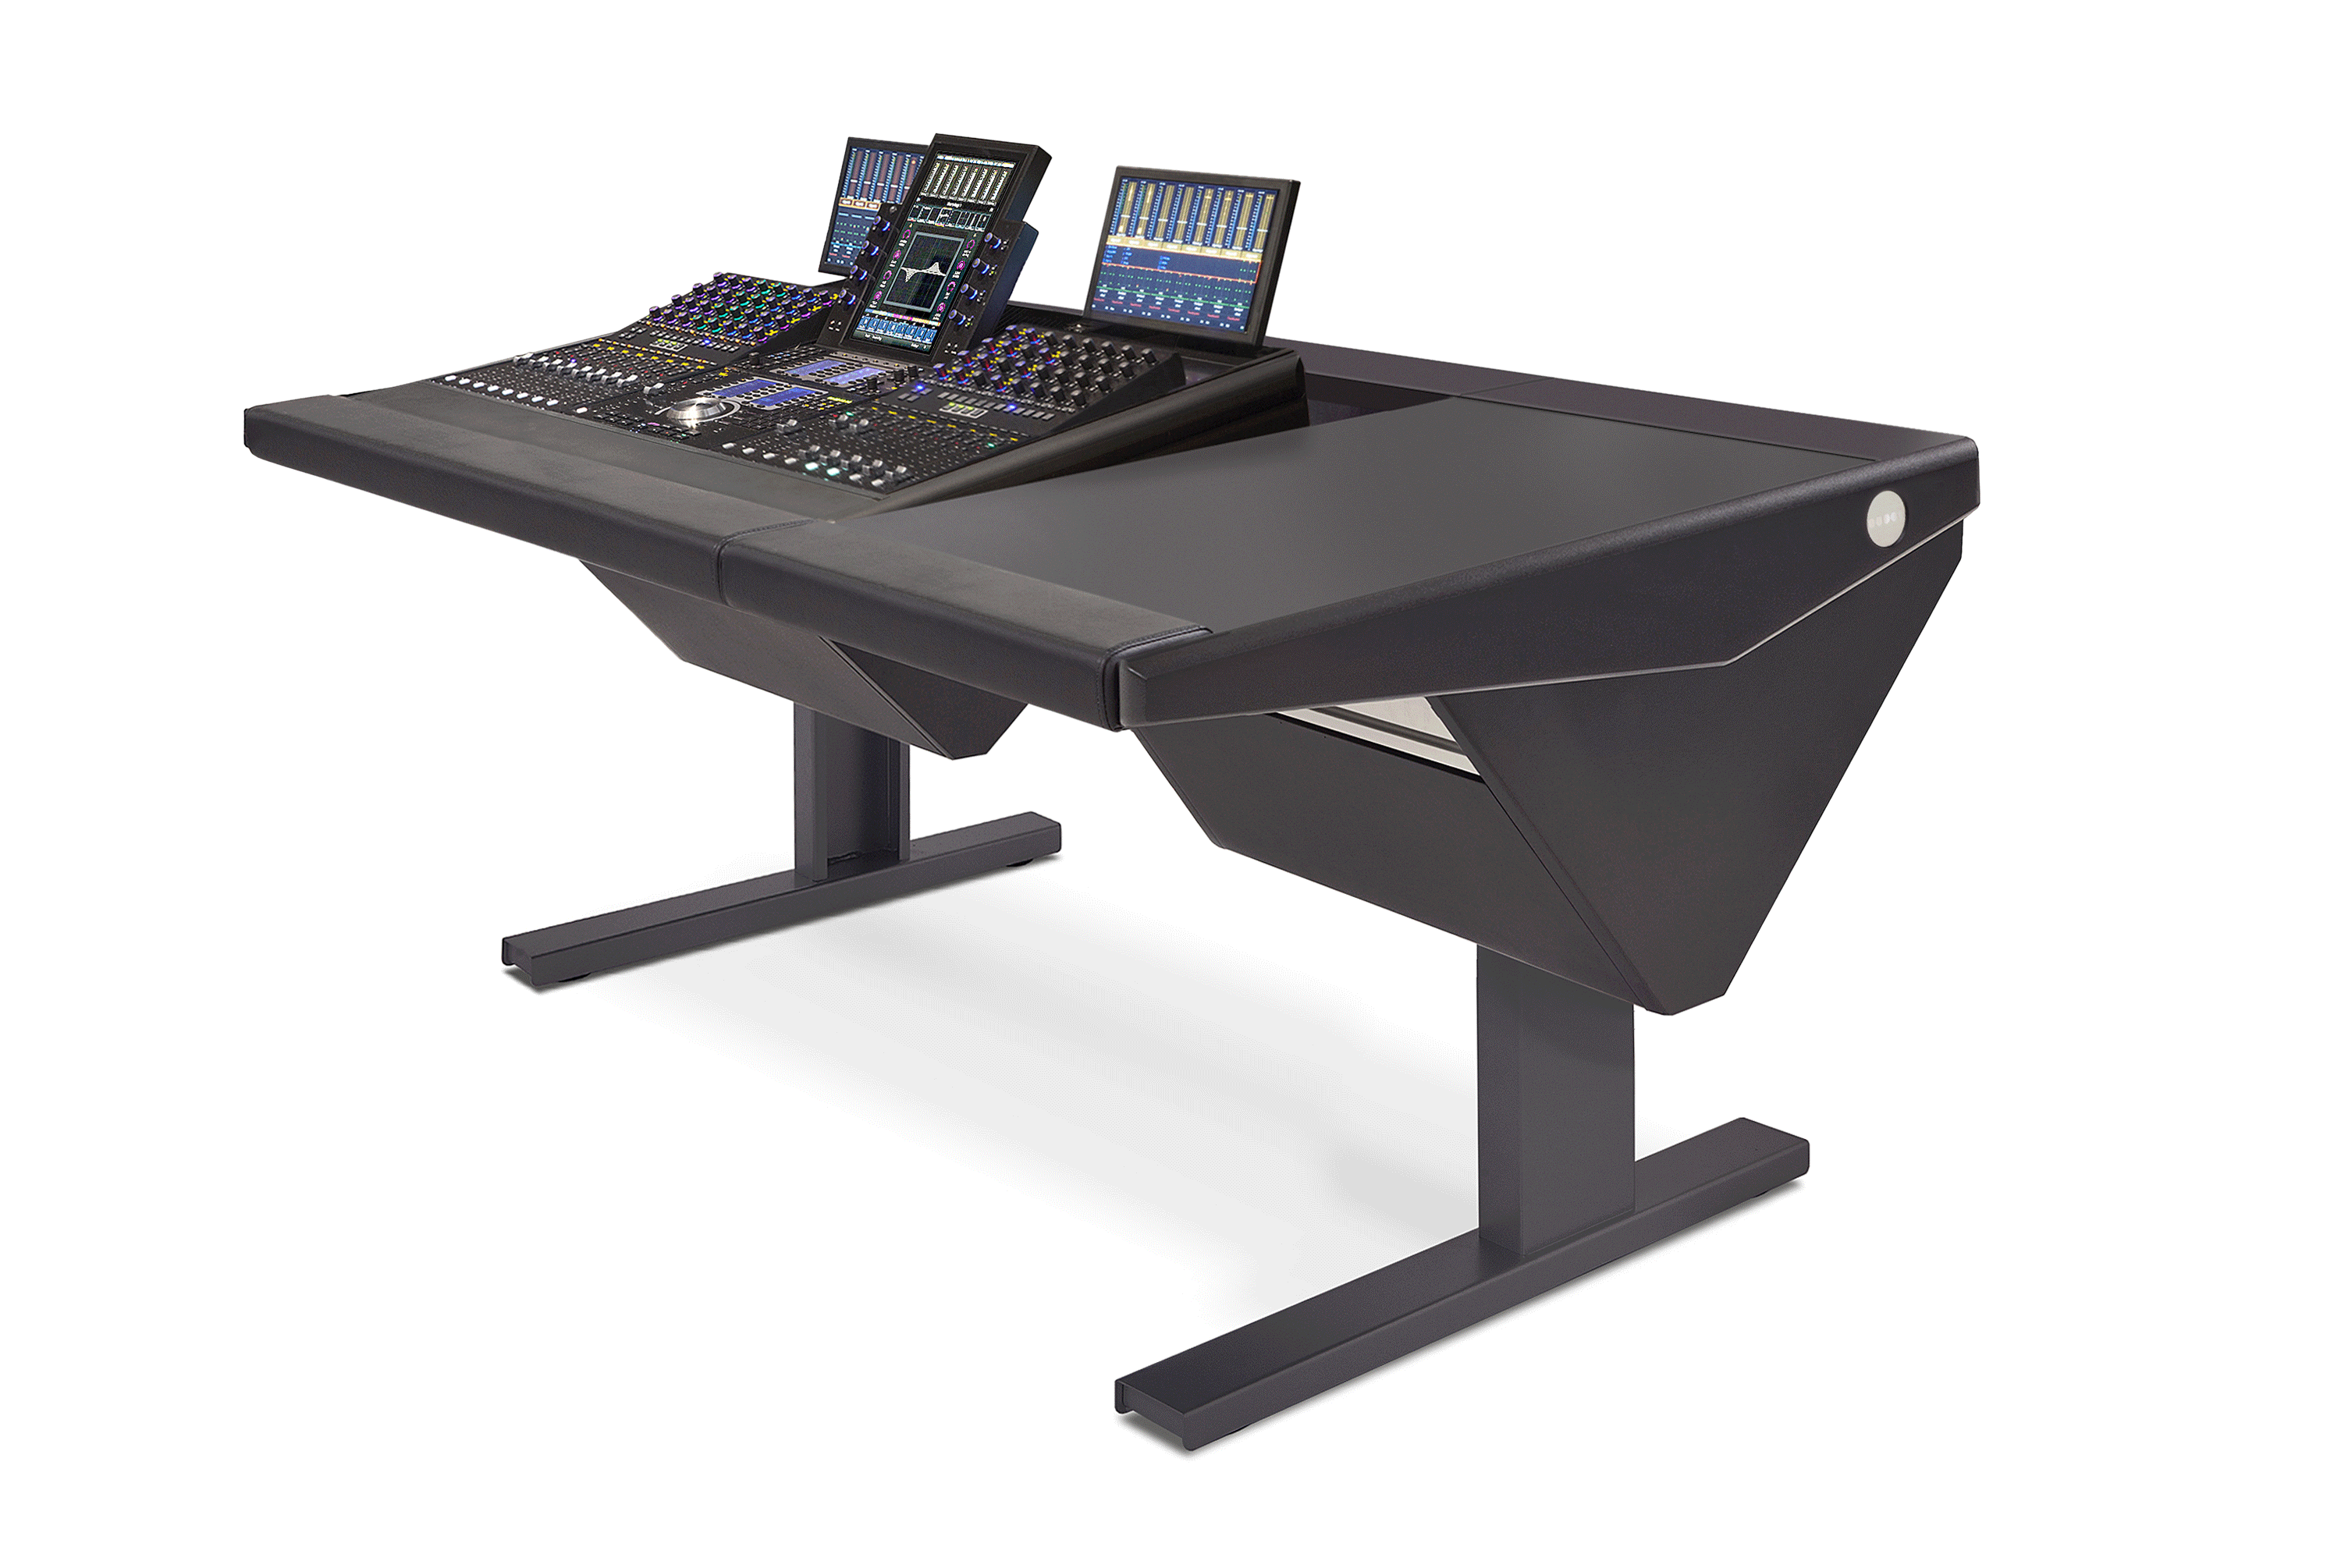 S4 - 3 Foot Wide Base System with Desk (R)